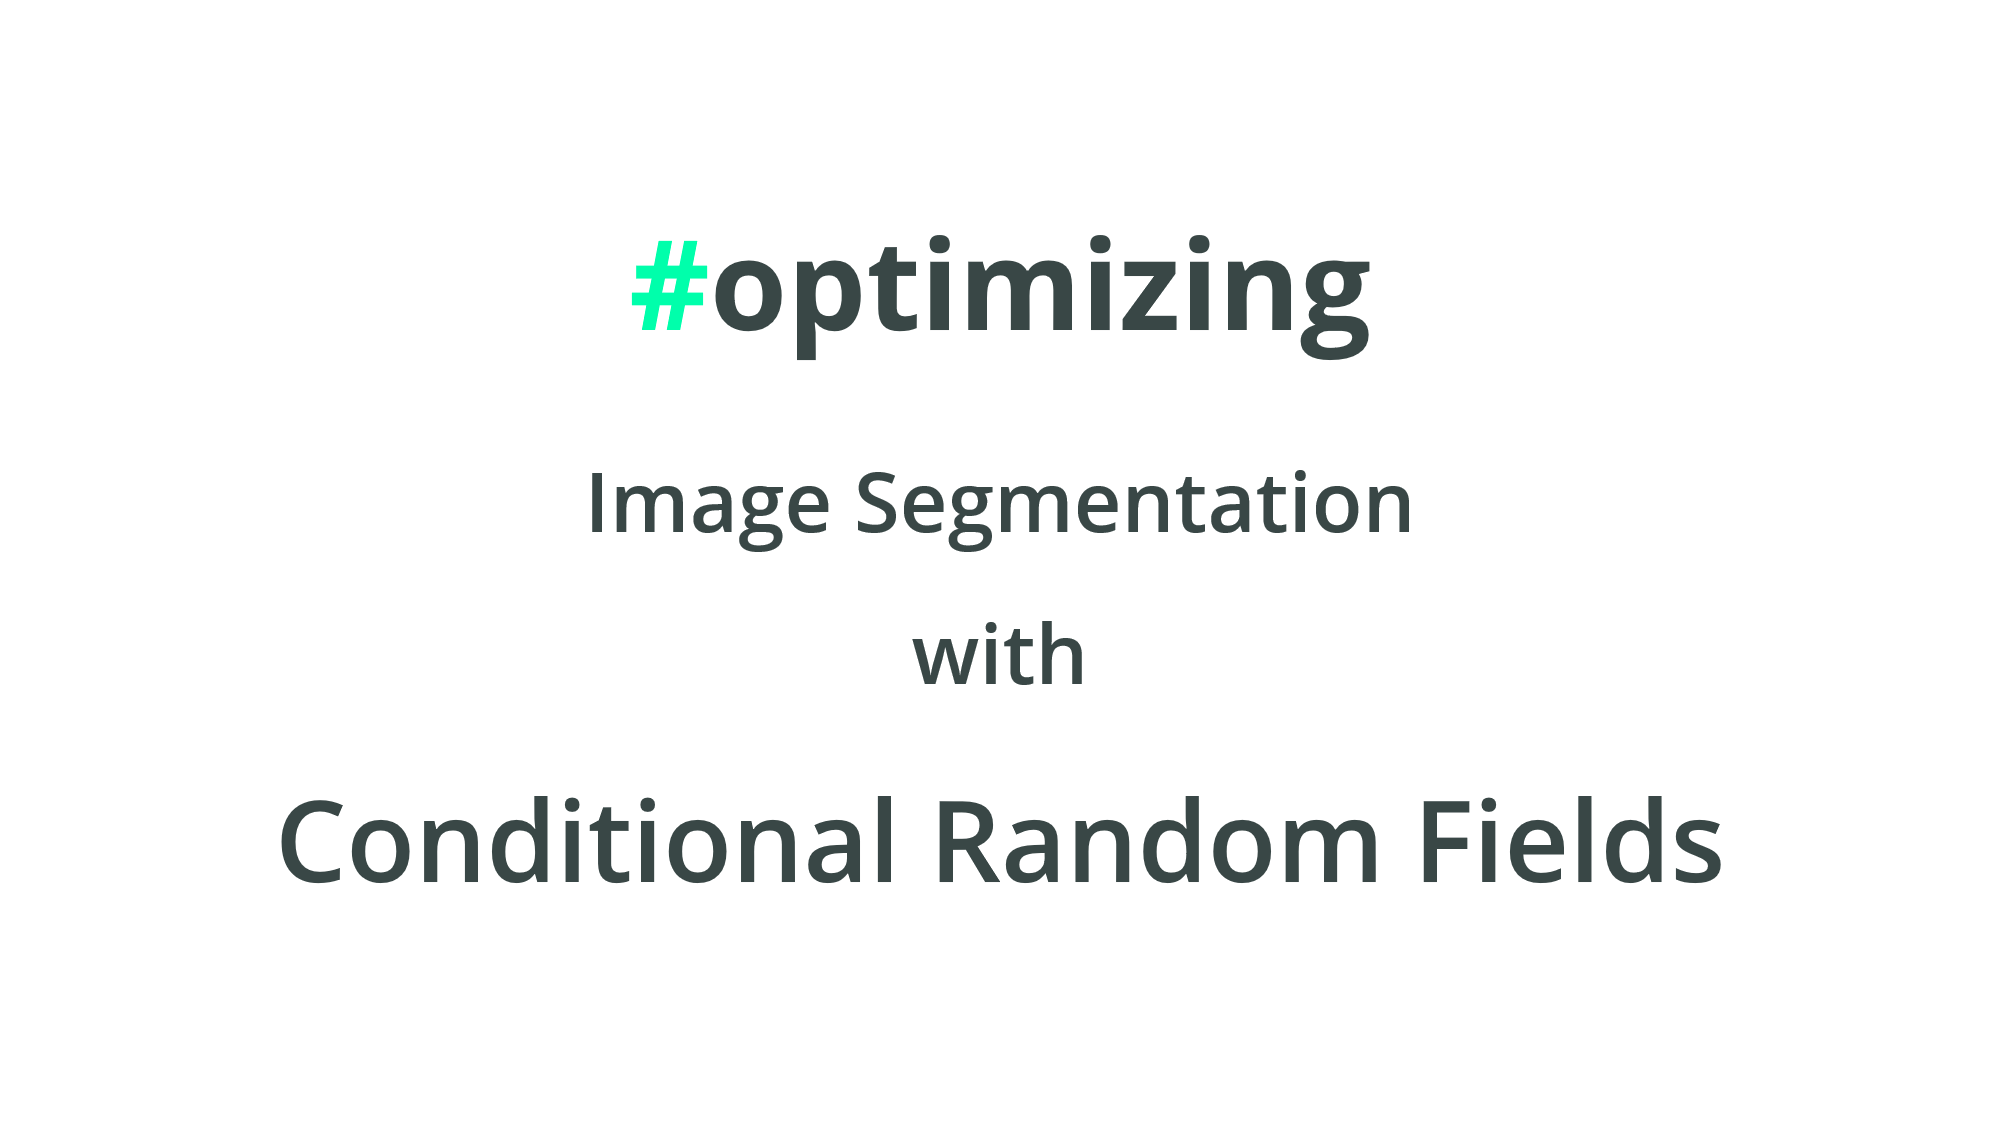 Improving Performance of Image Segmentation with Conditional Random Fields (CRF)